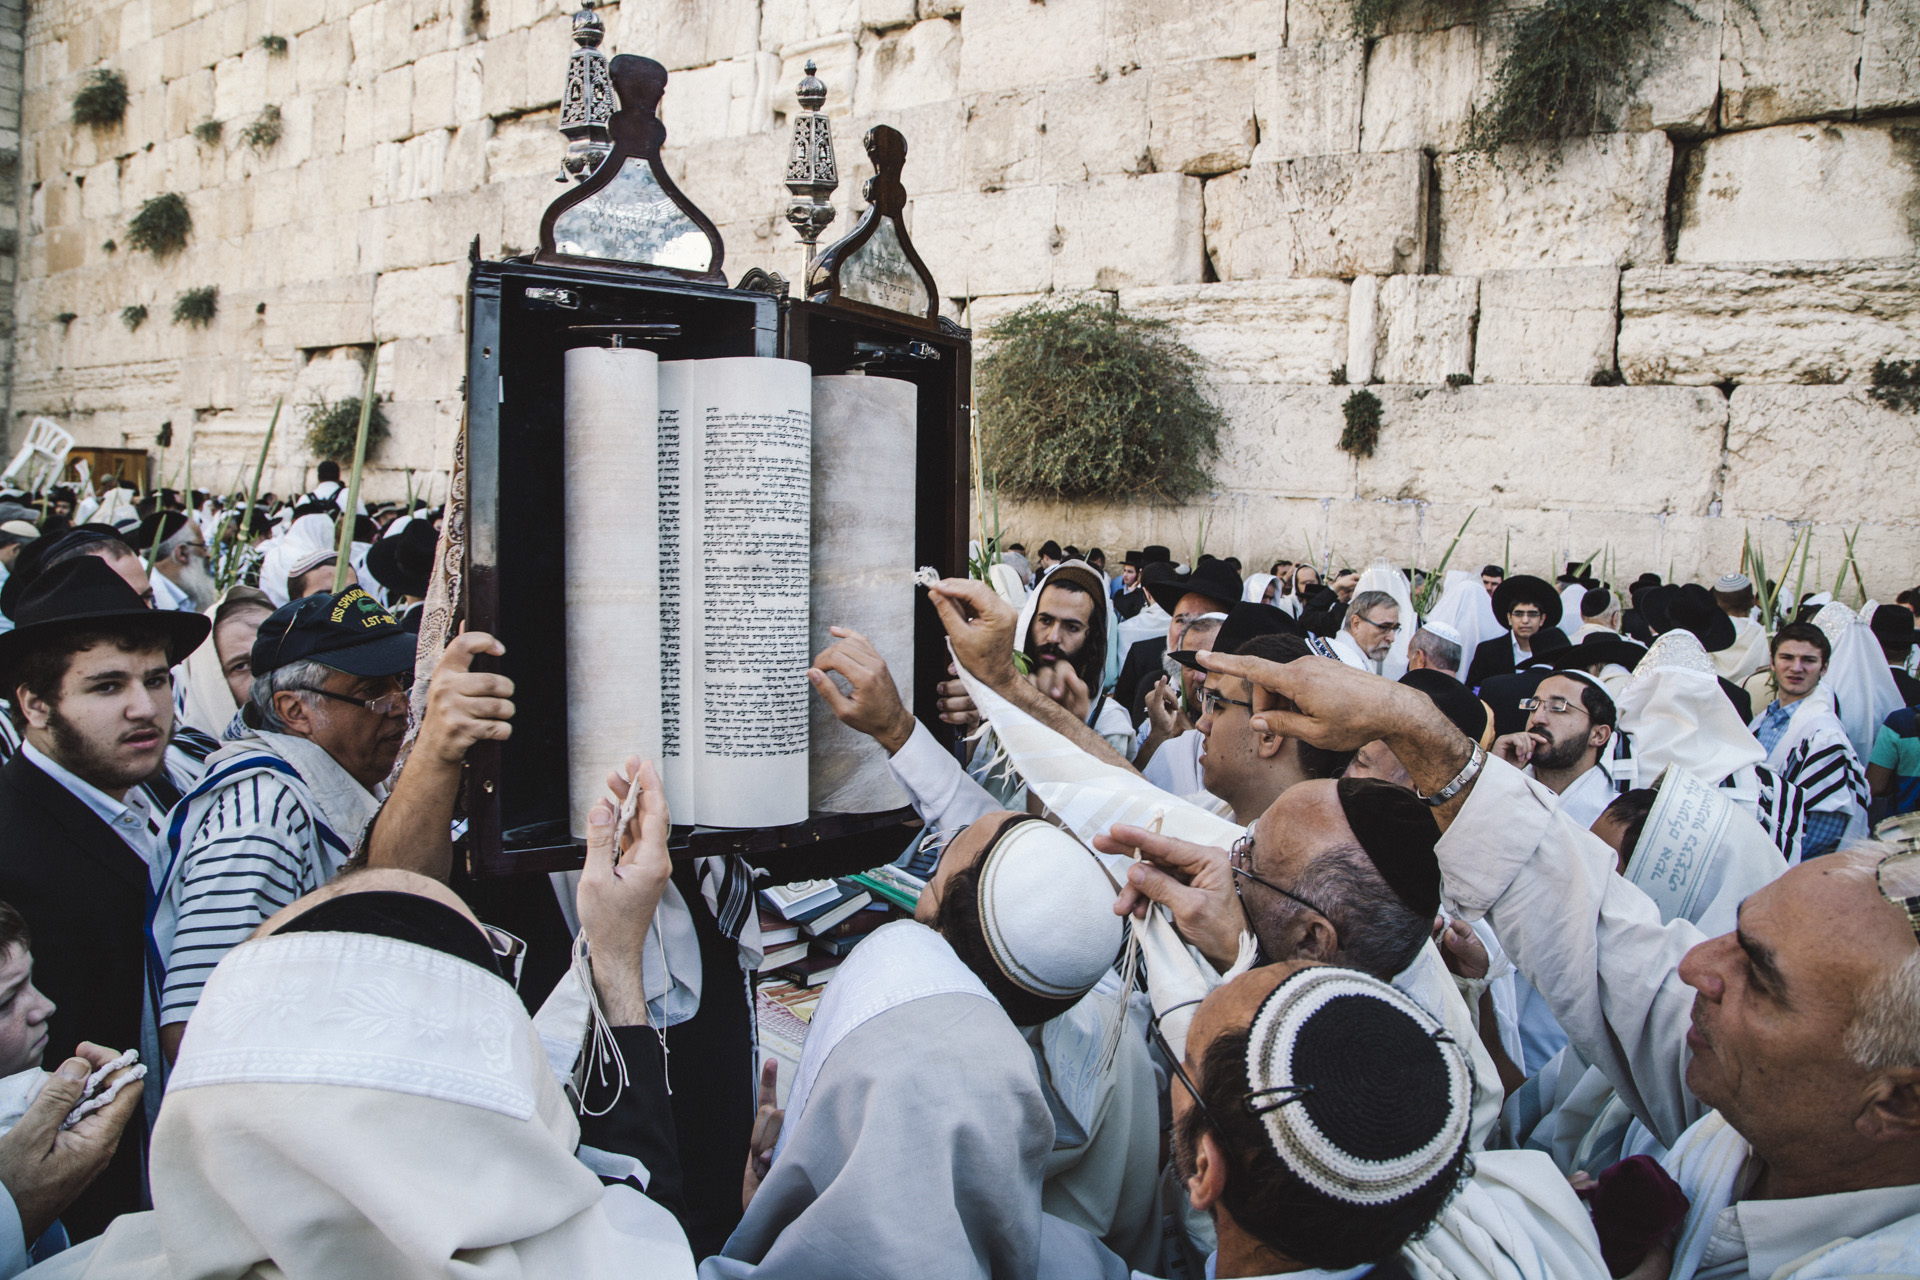 In the wailing wall people celebrates the feast of sukkot, a sacred celebration that is celebrated along 7 days.  The torah is uncover and people approach to touch the sacred book.